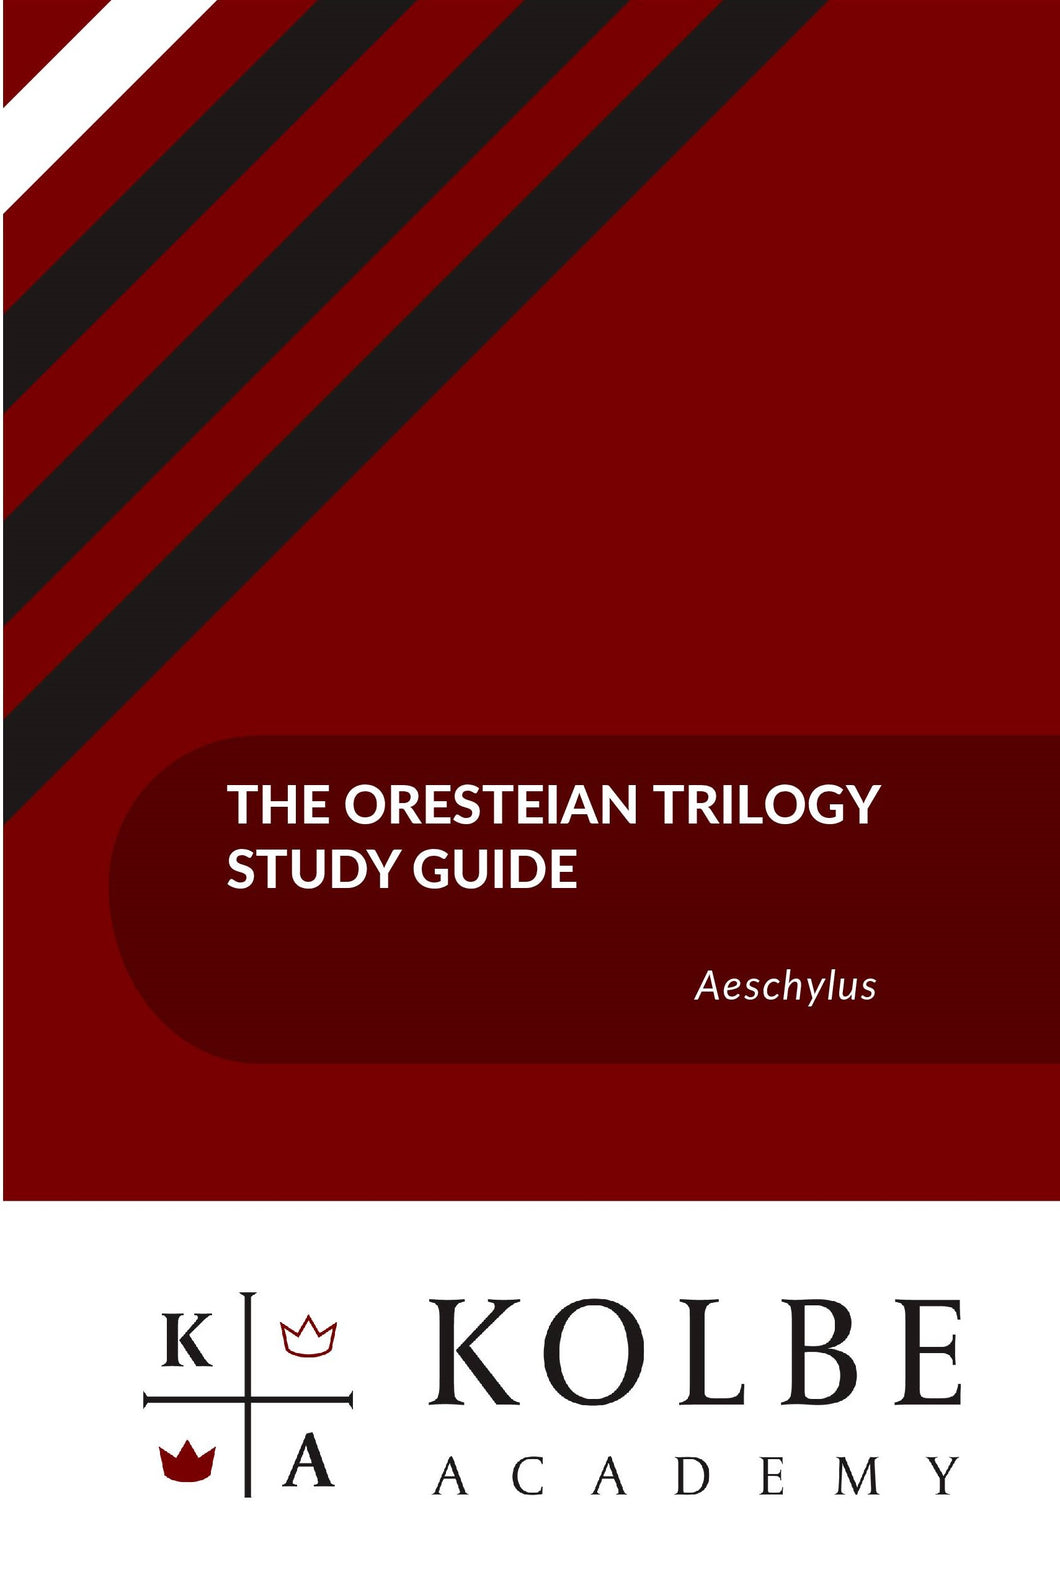 The Oresteian Trilogy Study Guide